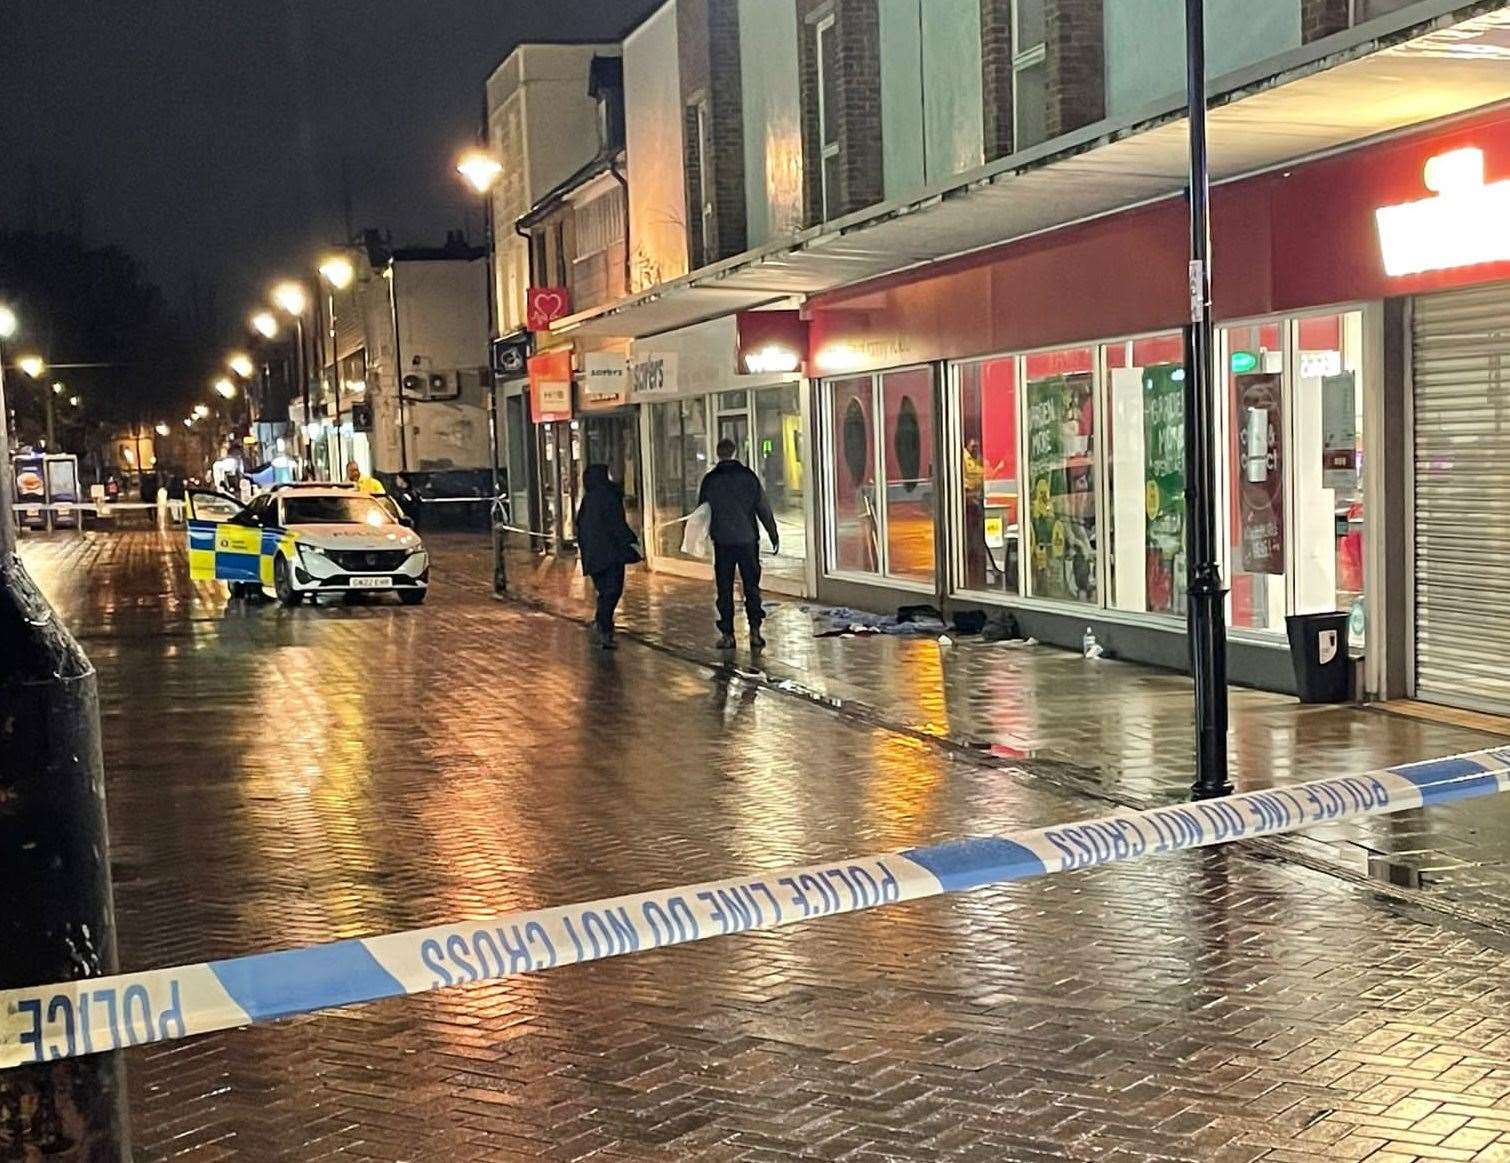 Police cordoned off part of Gillingham High Street after a suspected stabbing